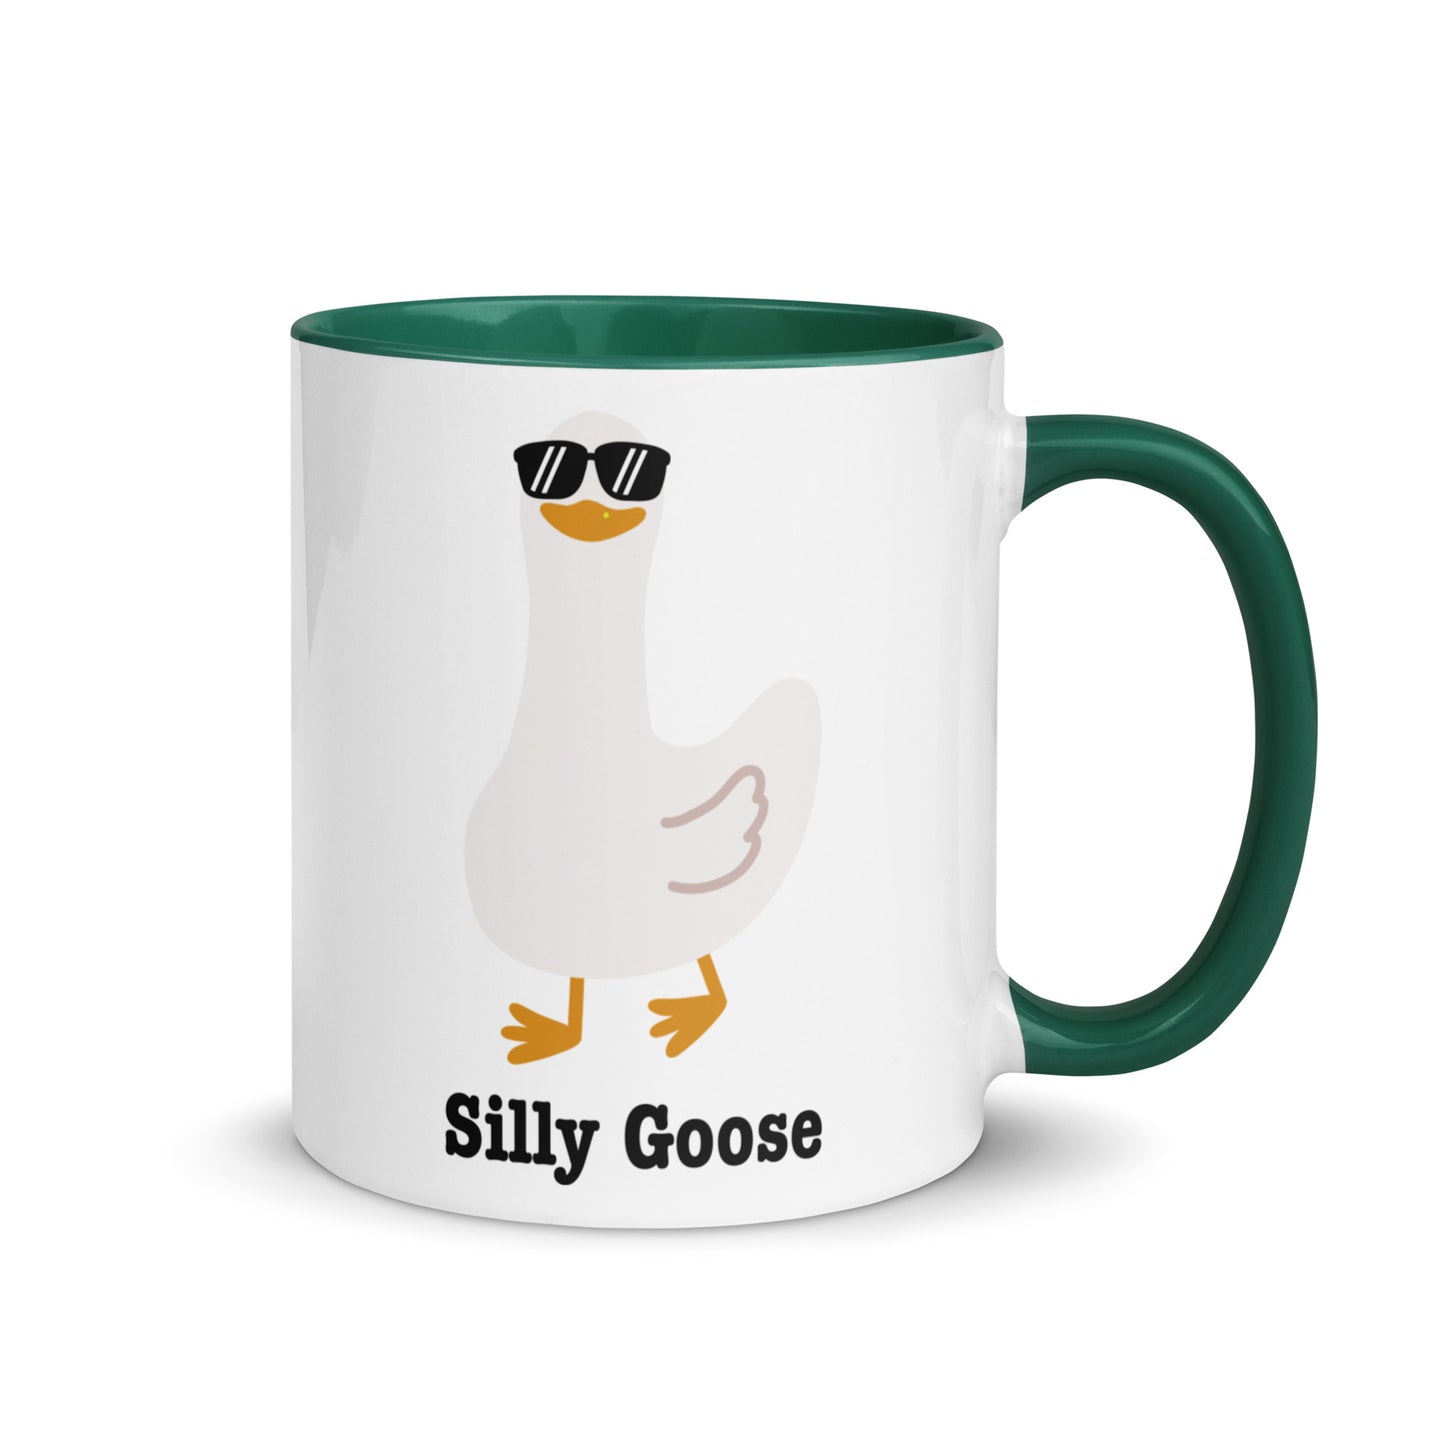 SILLY GOOSE Mug with Color